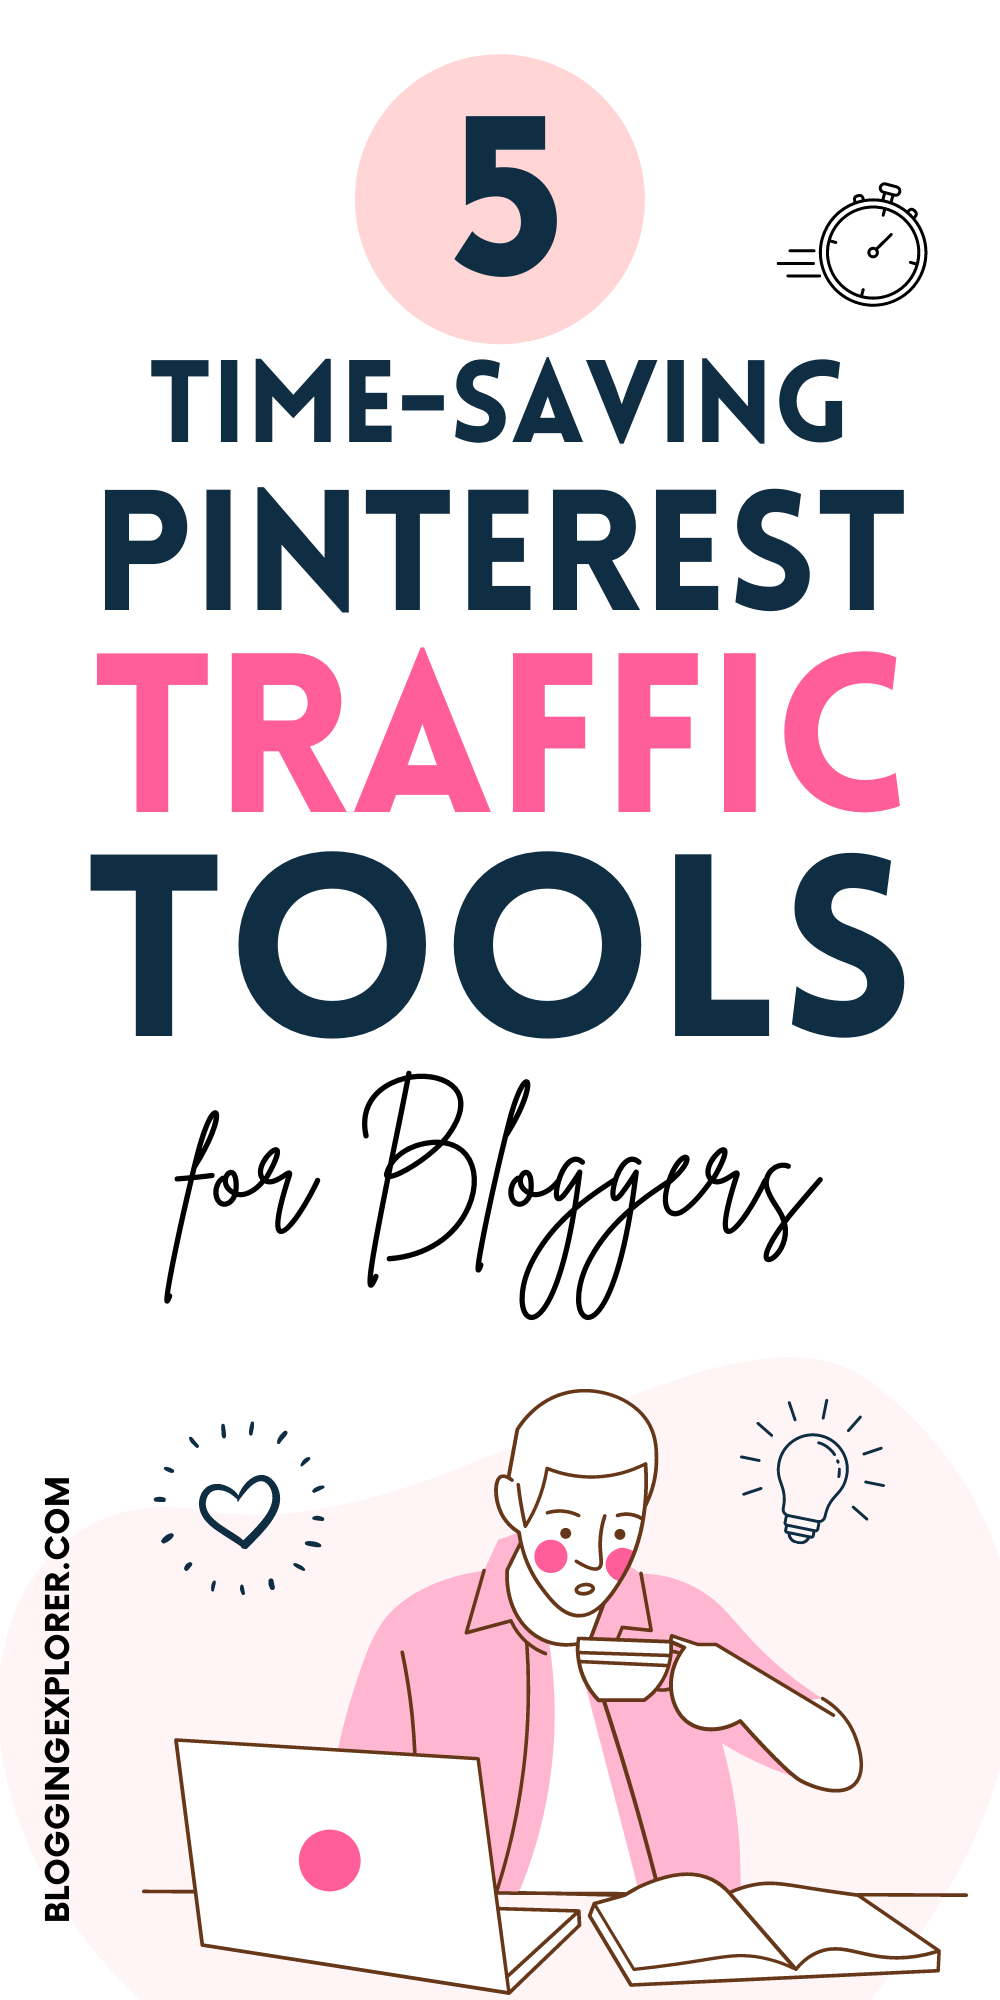 6 Best Pinterest Tools to Grow Your Blog Traffic Faster